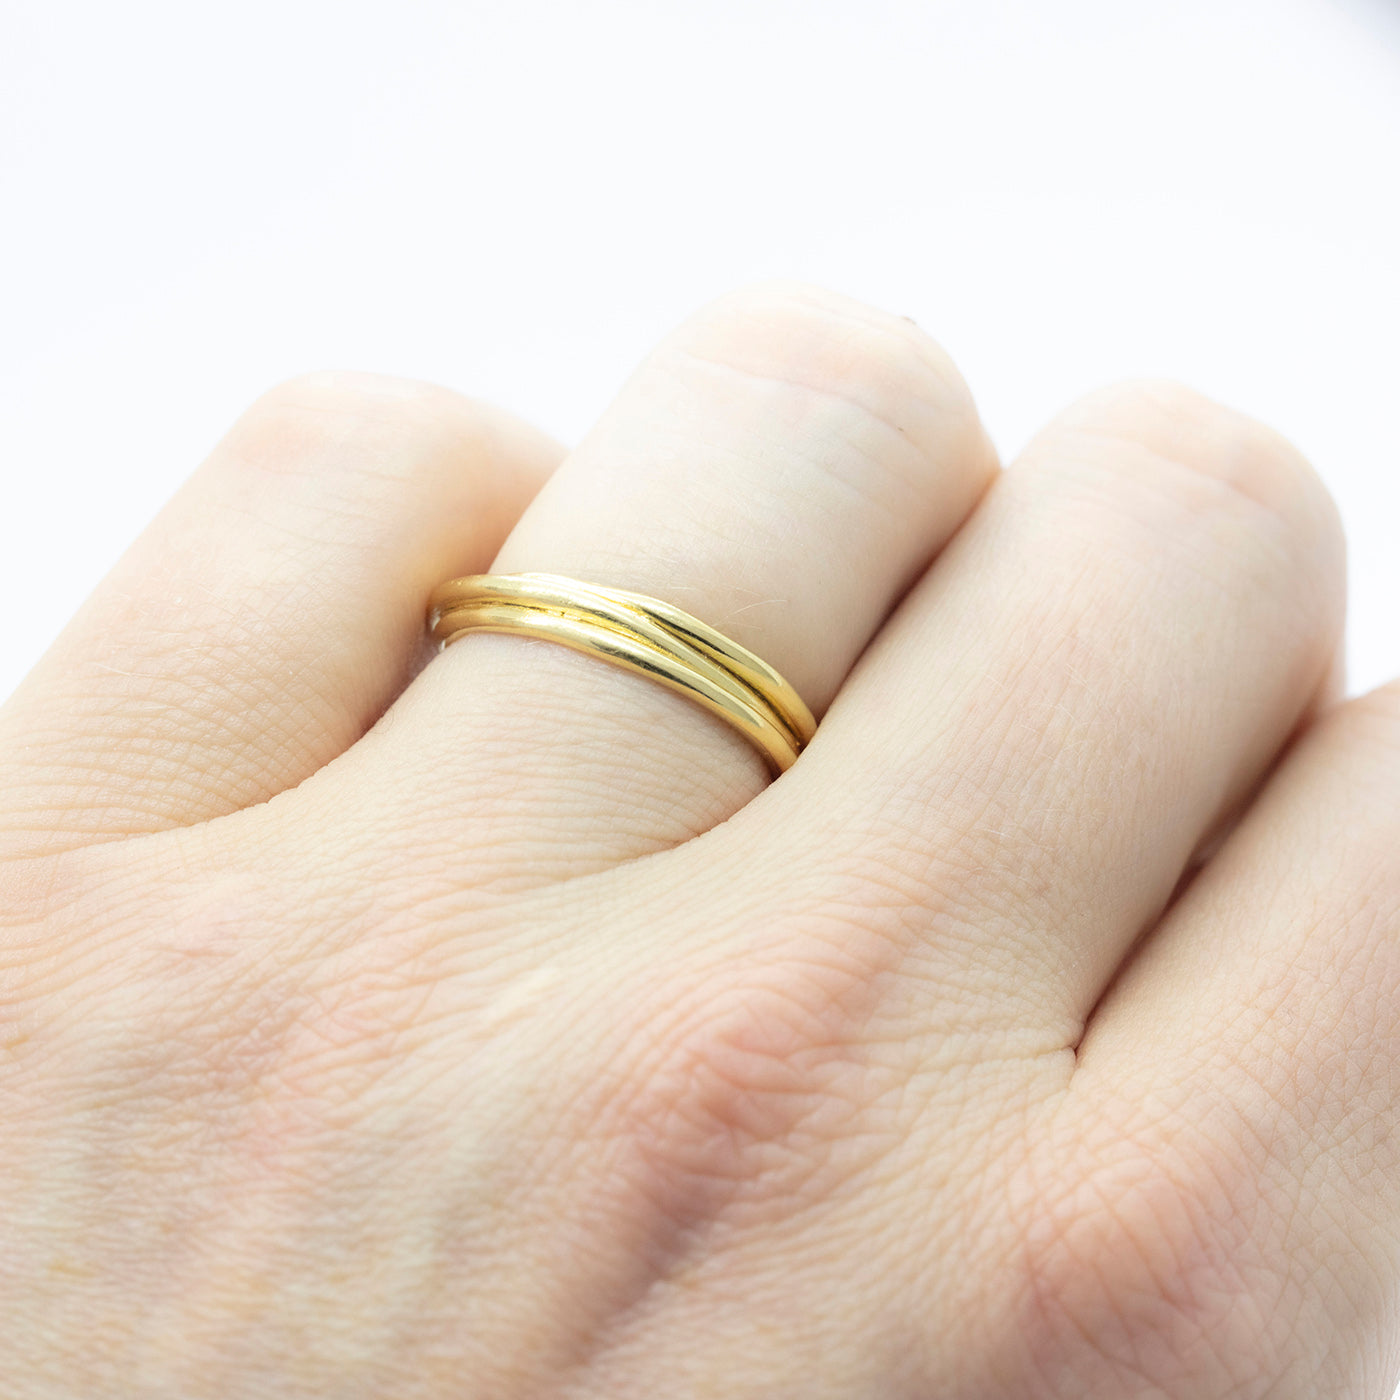 Ring Embrace Wedding Band for Him 14ct or 18ct yellow gold product view innan jewellery independent atelier berlin